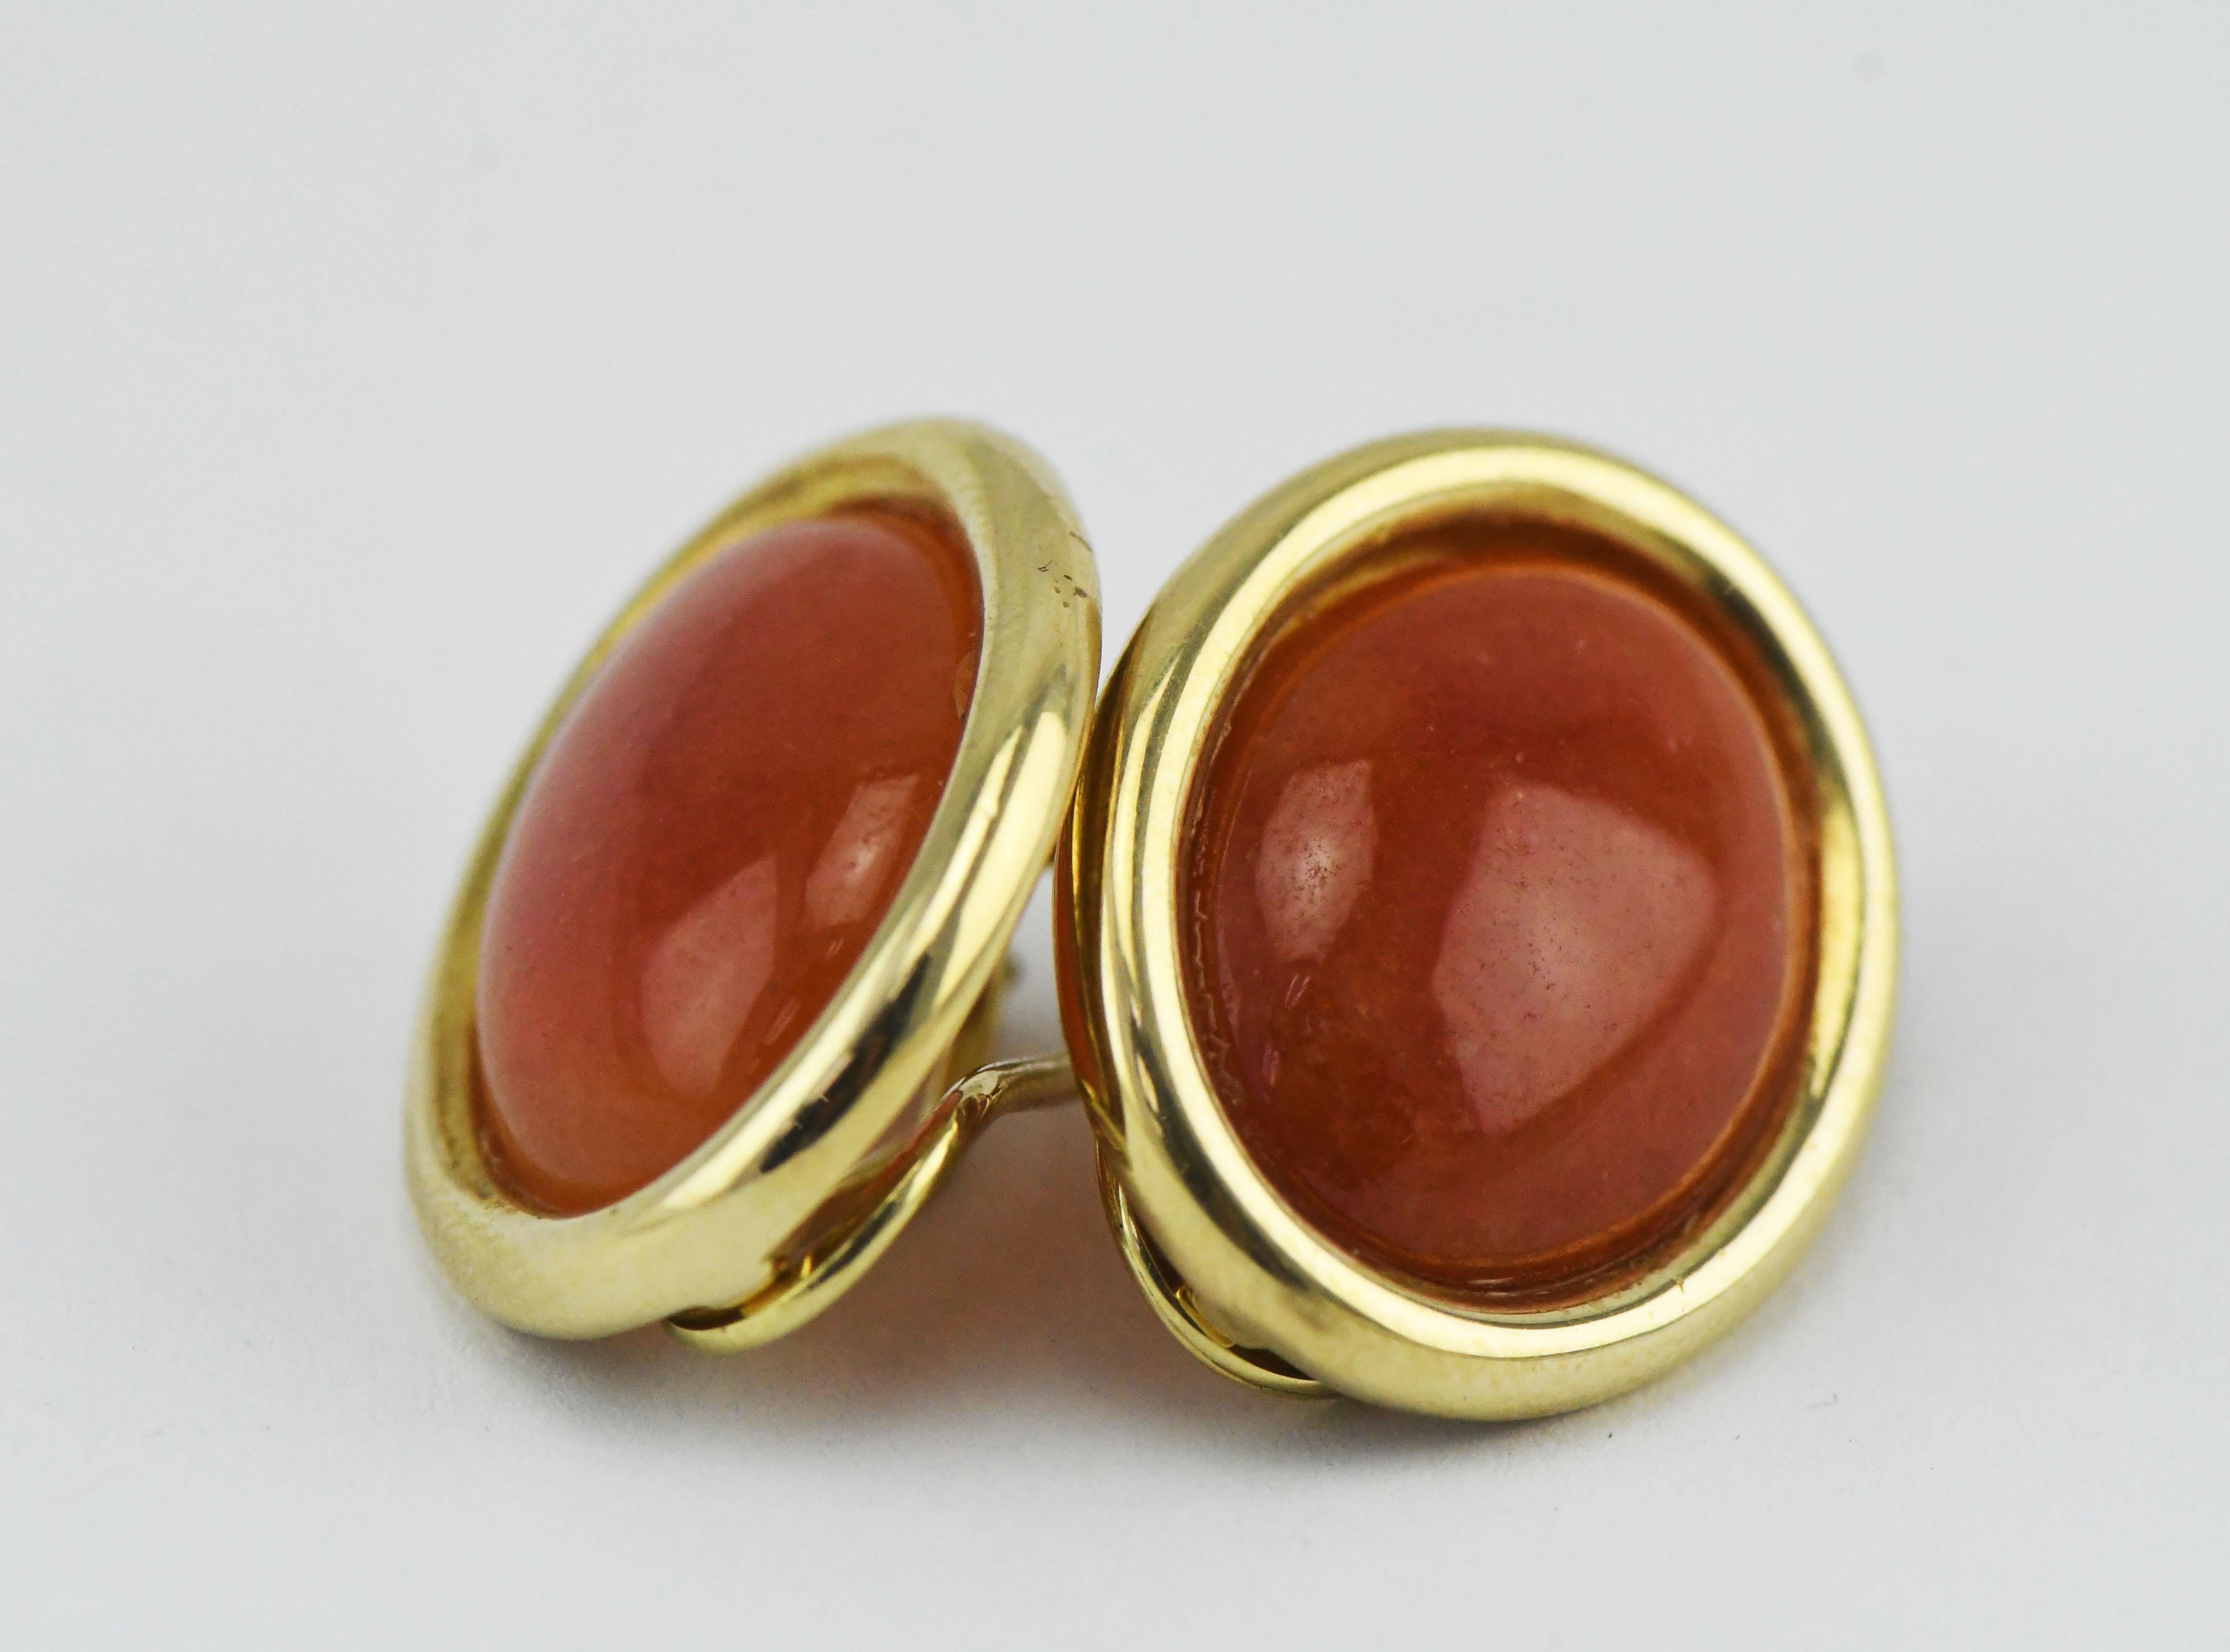 Tse Sui Luen  14k Gold Earrings with Cabochon Carved Carnelian with Omega Backs. TSL was founded by Mr. Tse Sui Luen - a legend in the Hong Kong jewellery industry - in the 1960's. The Group was then incorporated in 1971 and listed on the Hong Kong